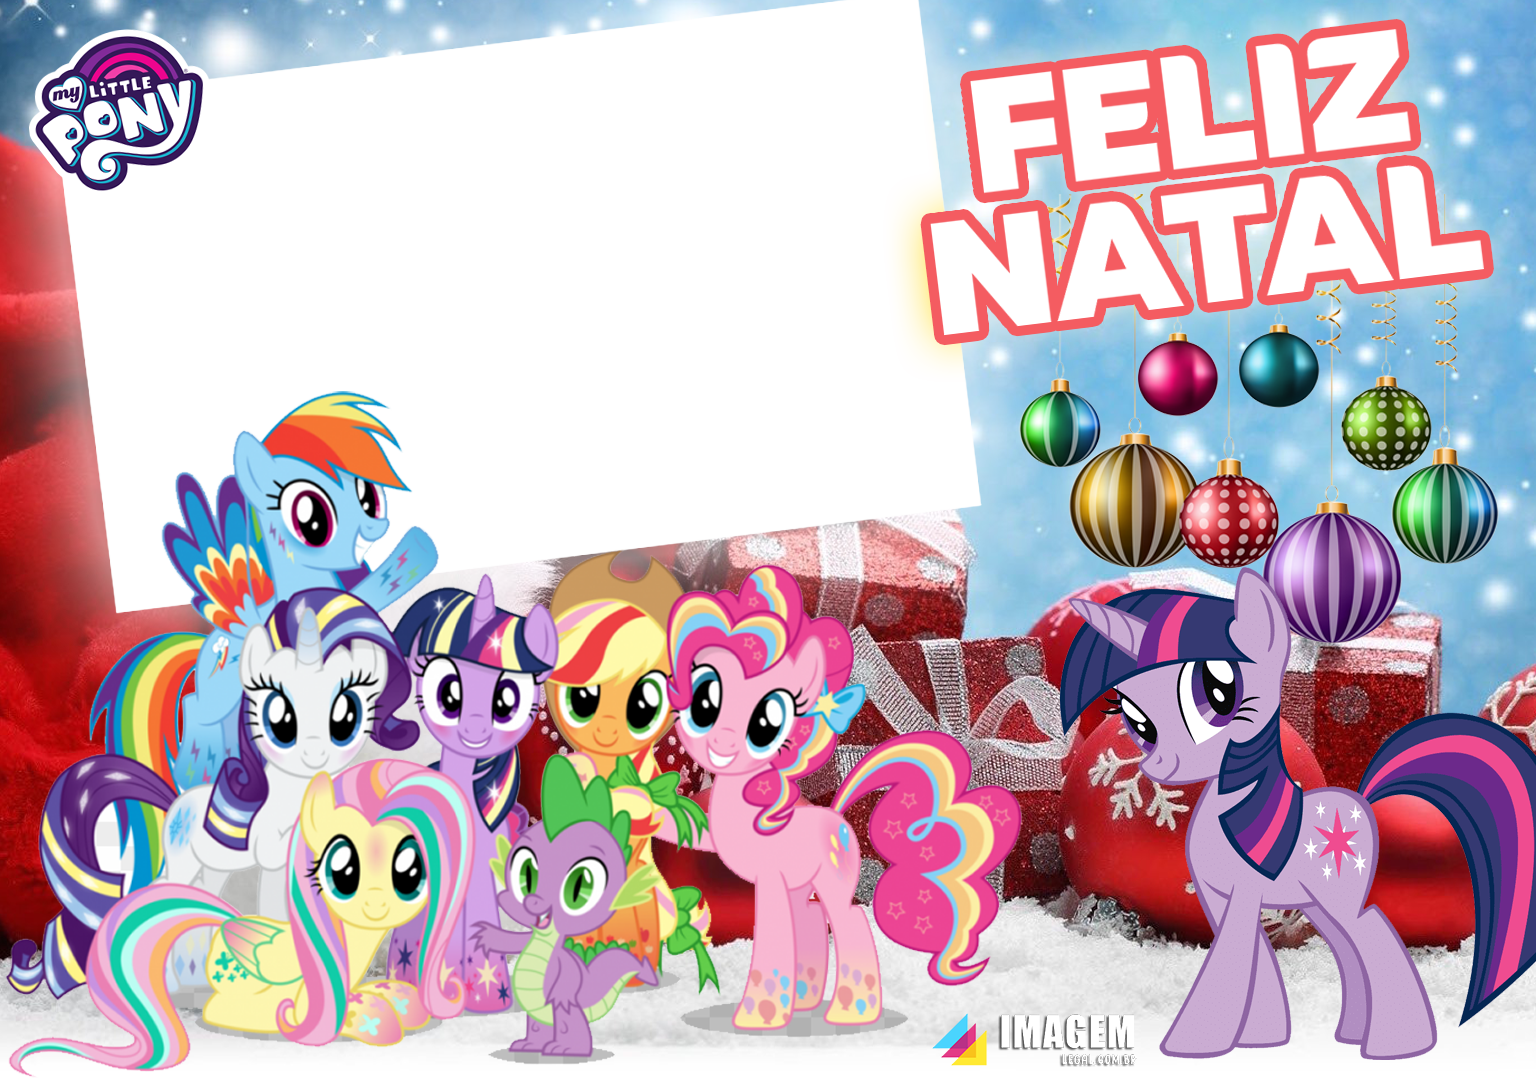 Little Pony png images